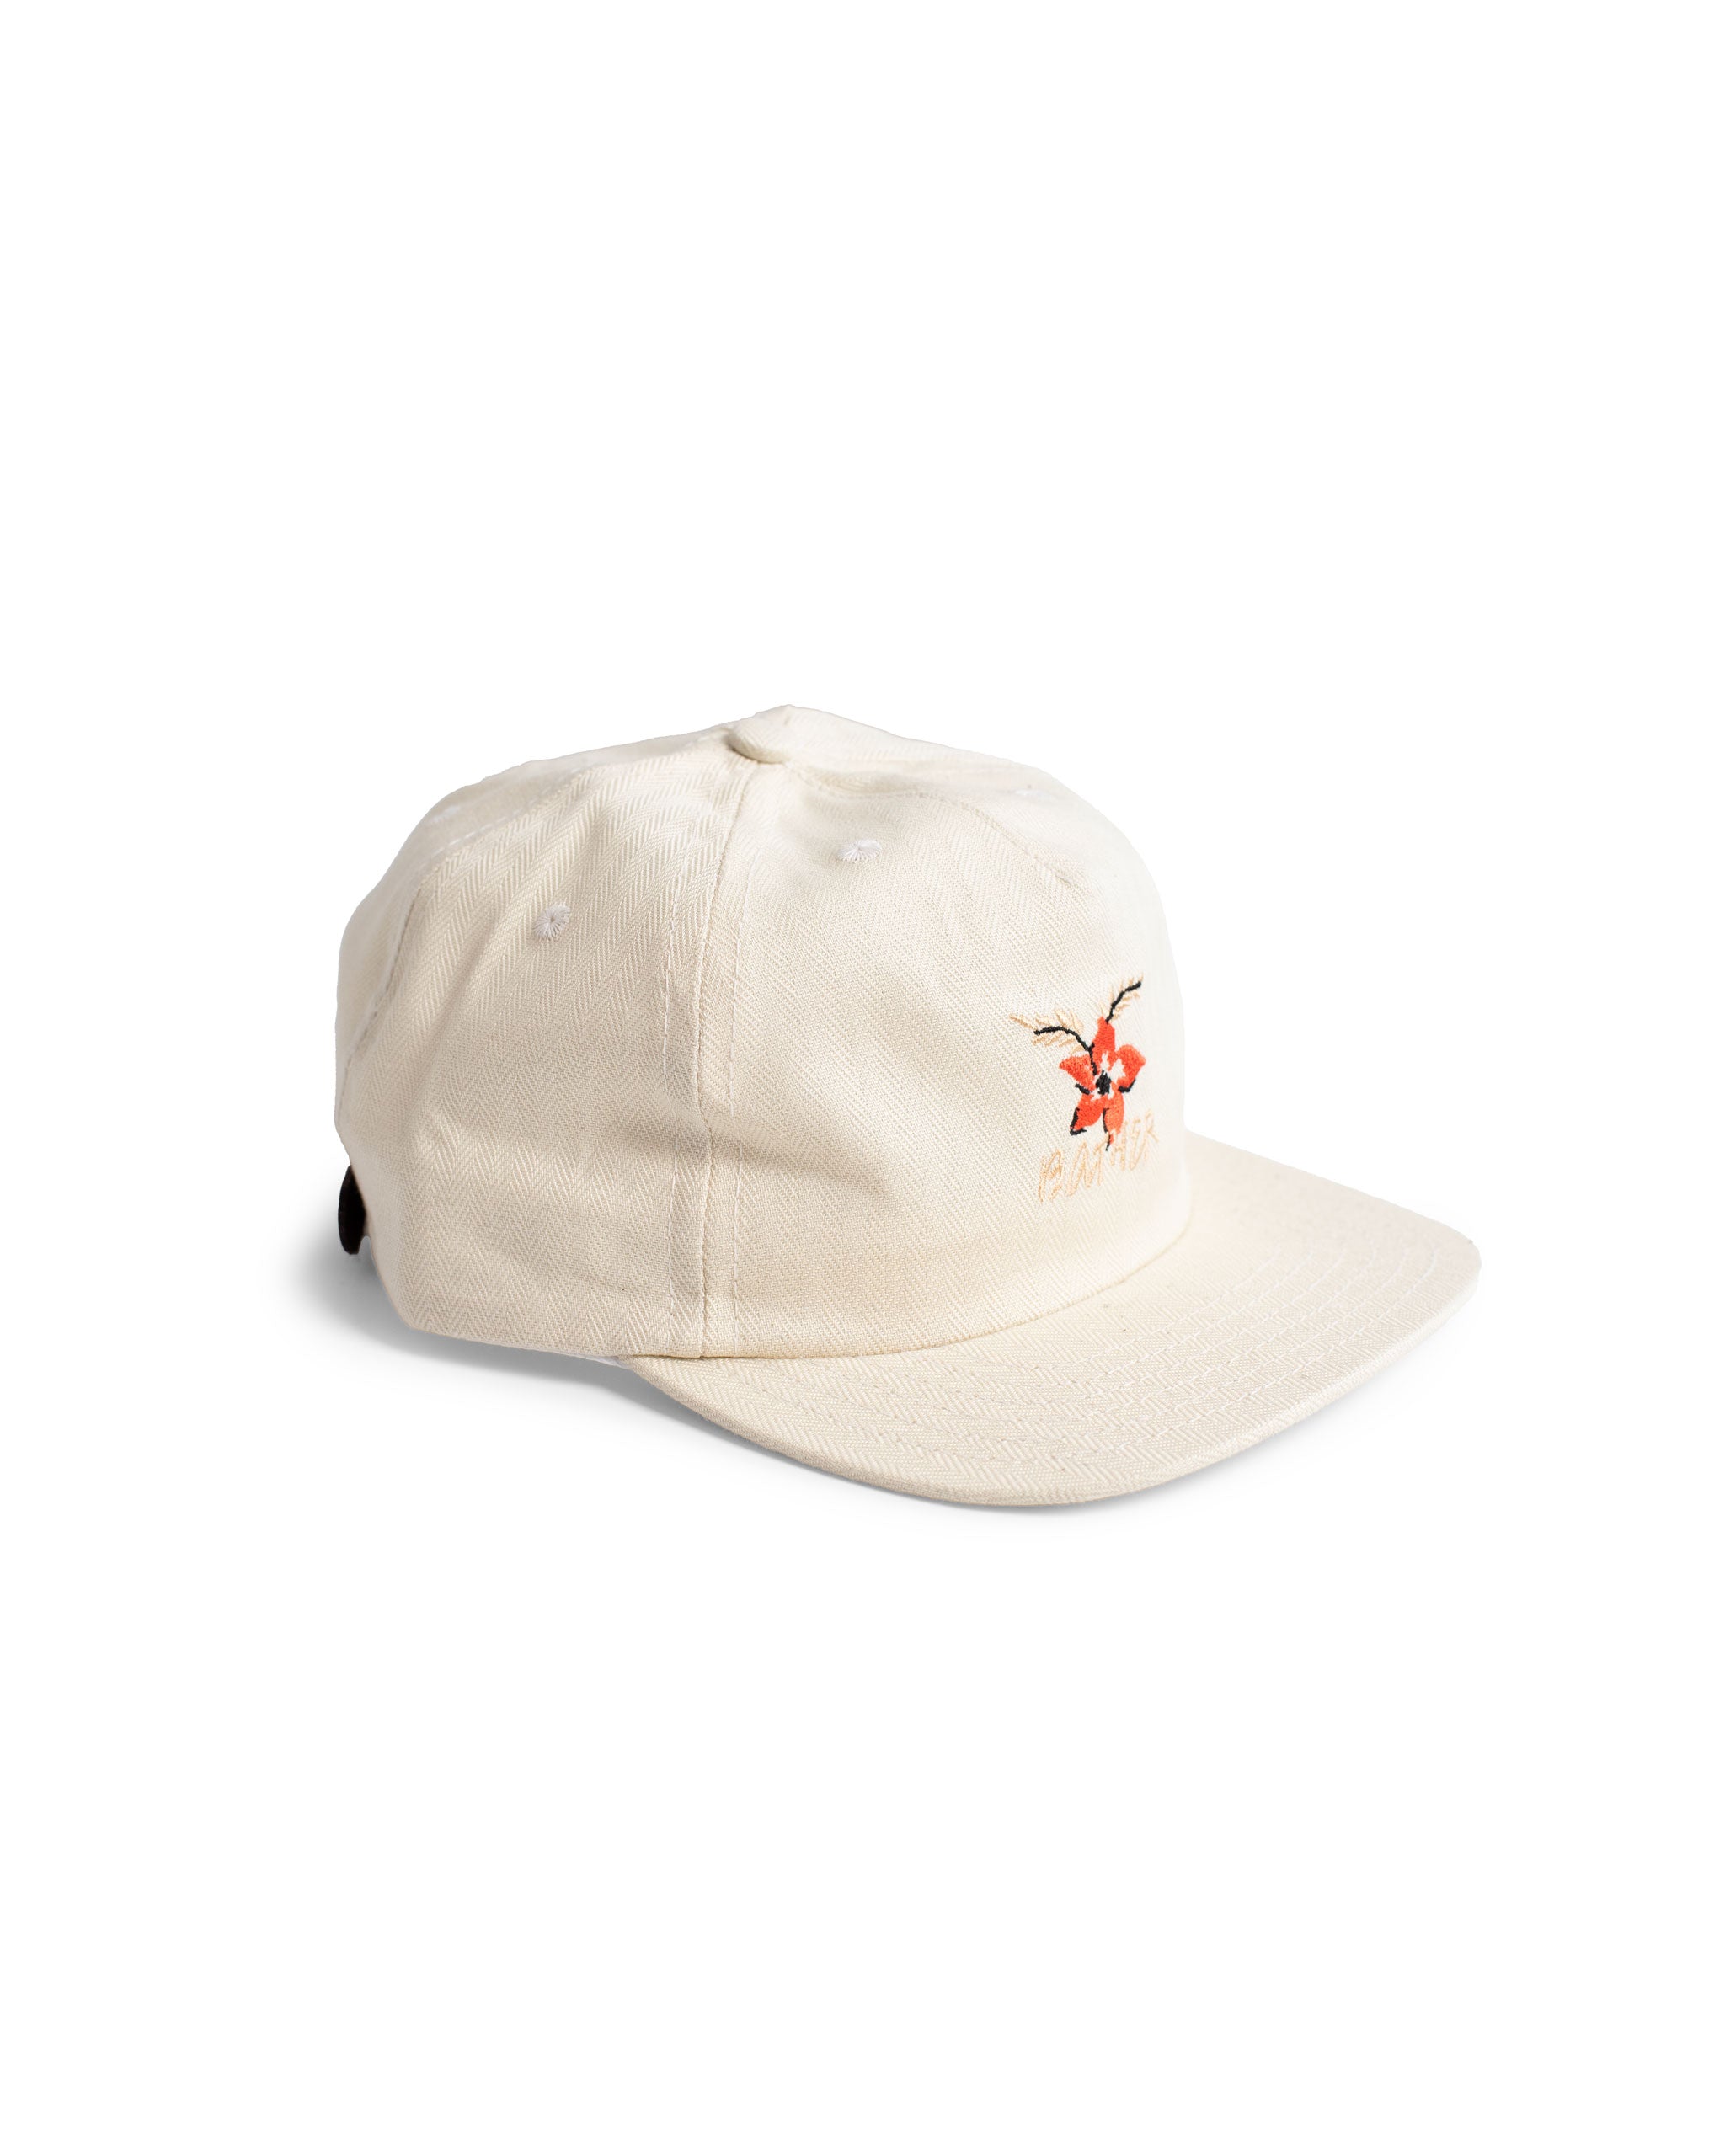 Dove Herringbone 5 Panel Cap with floral embroidered pattern